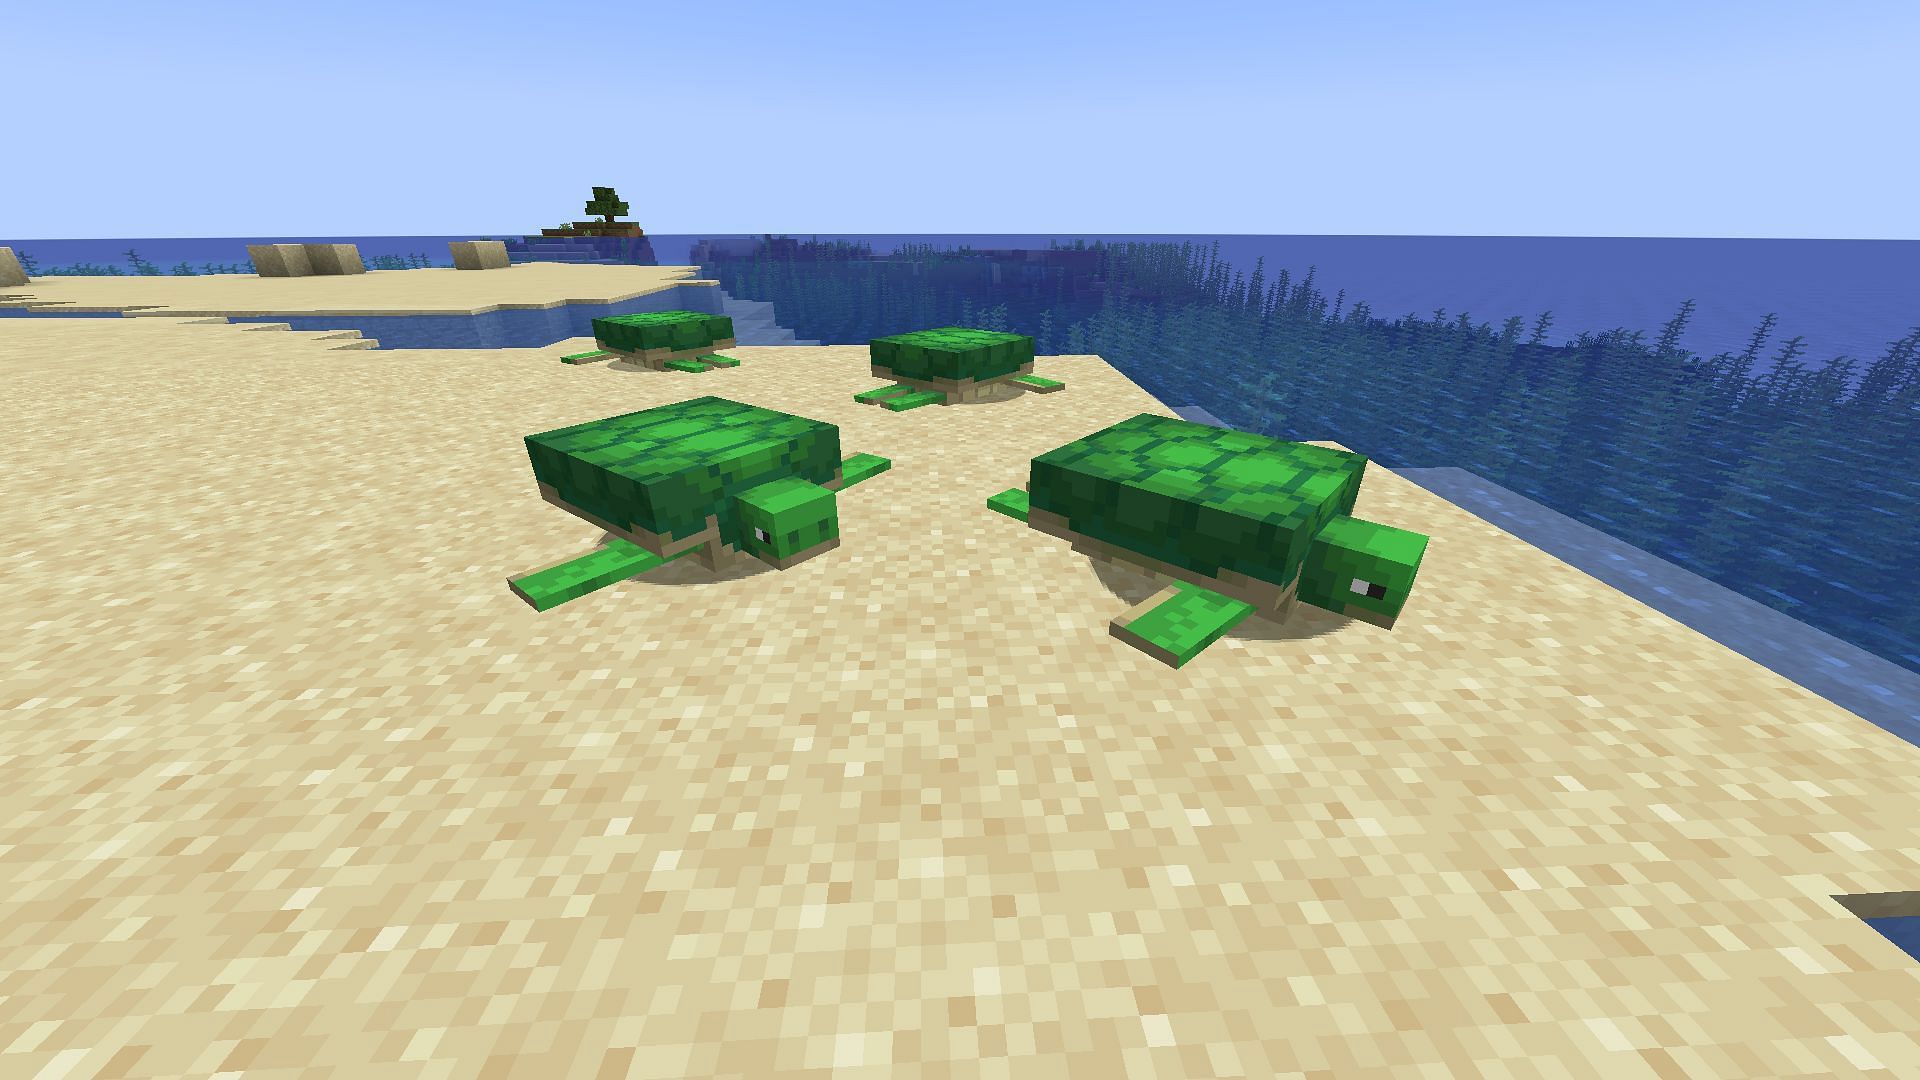 Turtles are most commonly found in beach biomes (Image via Mojang)